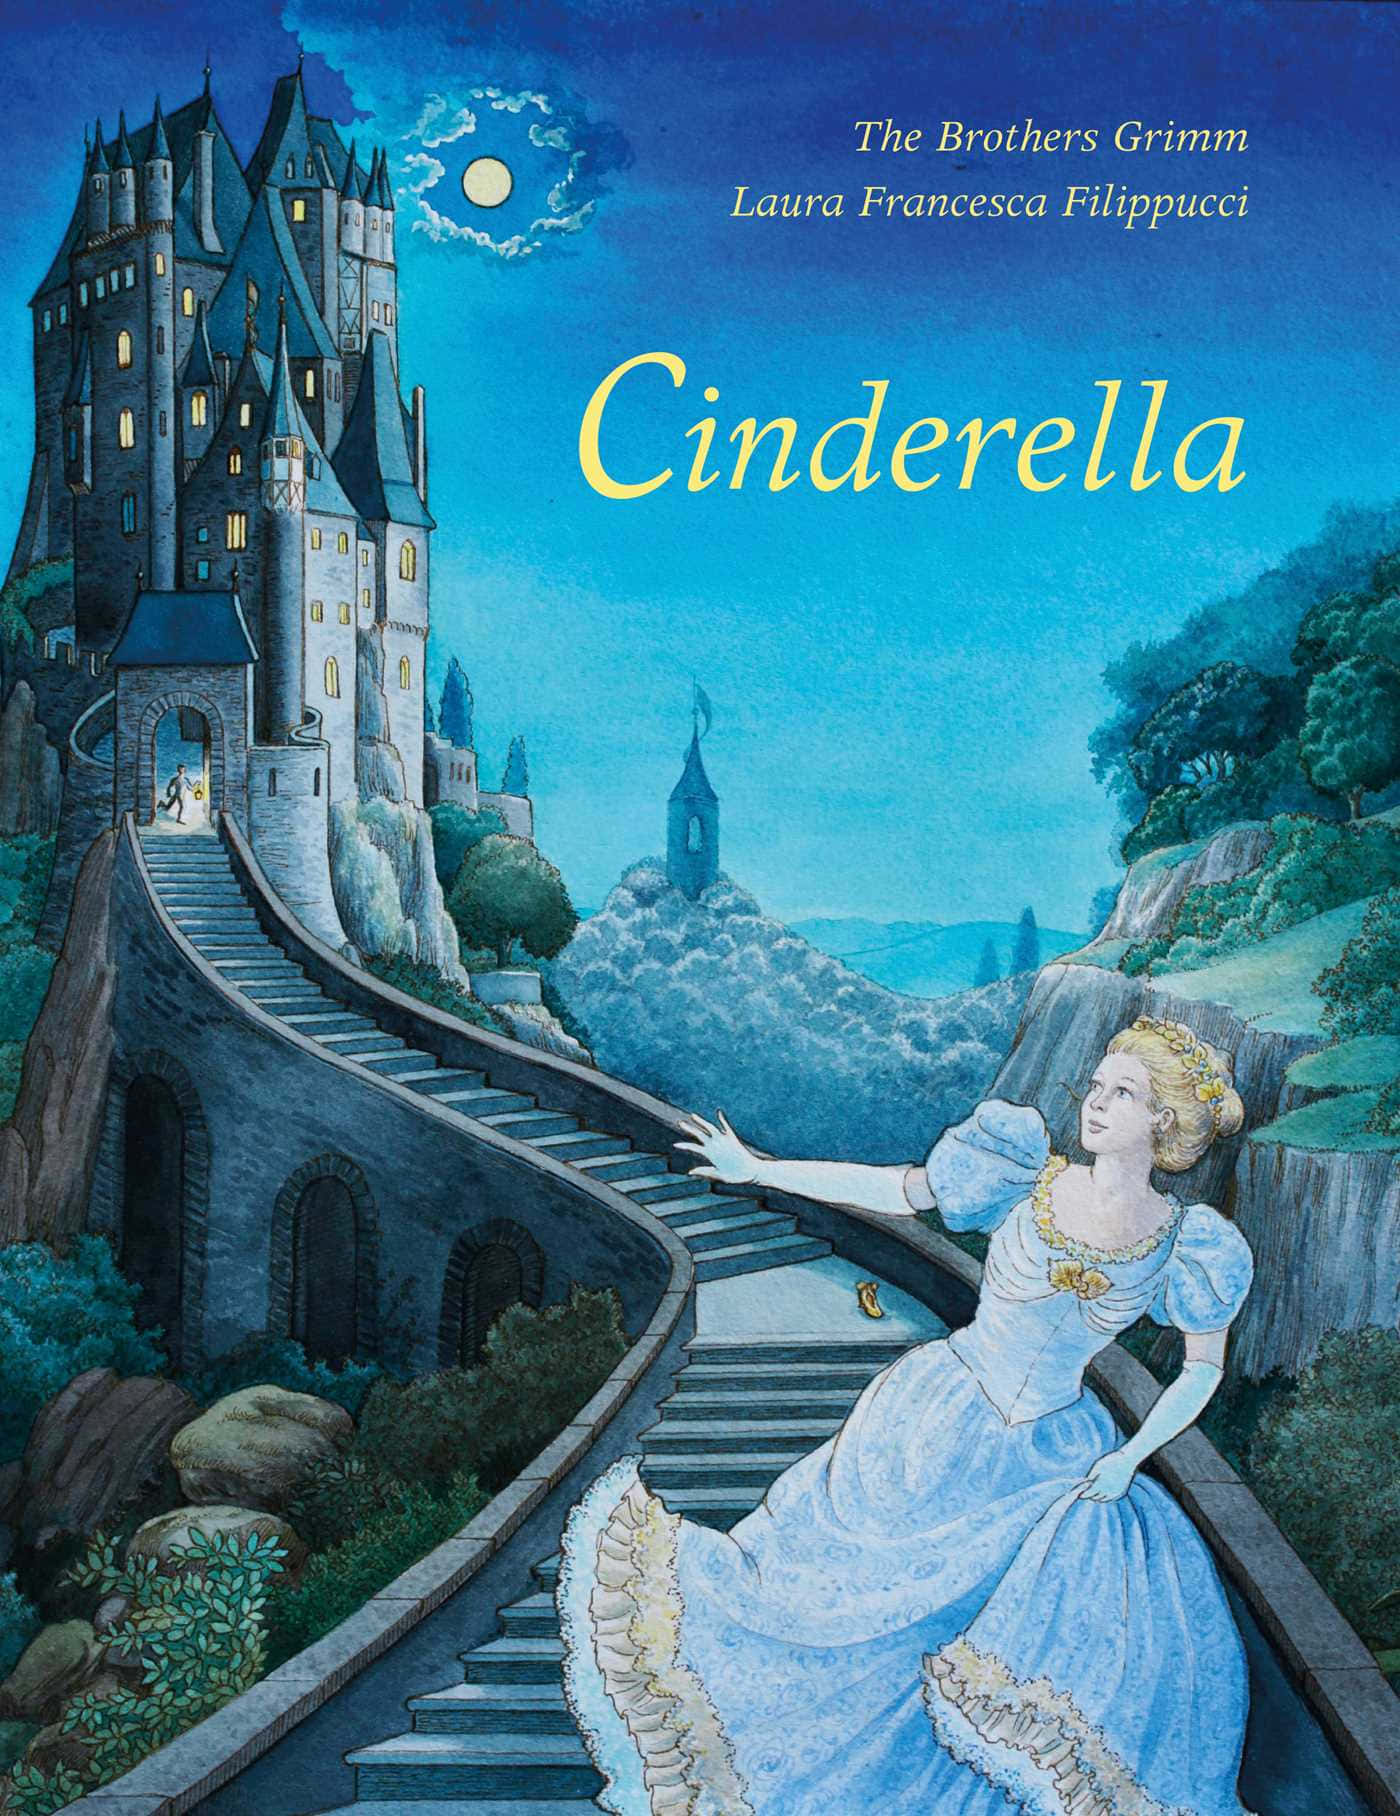 "Cinderella turns pumpkins into a horse-drawn carriage in the Disney classic."